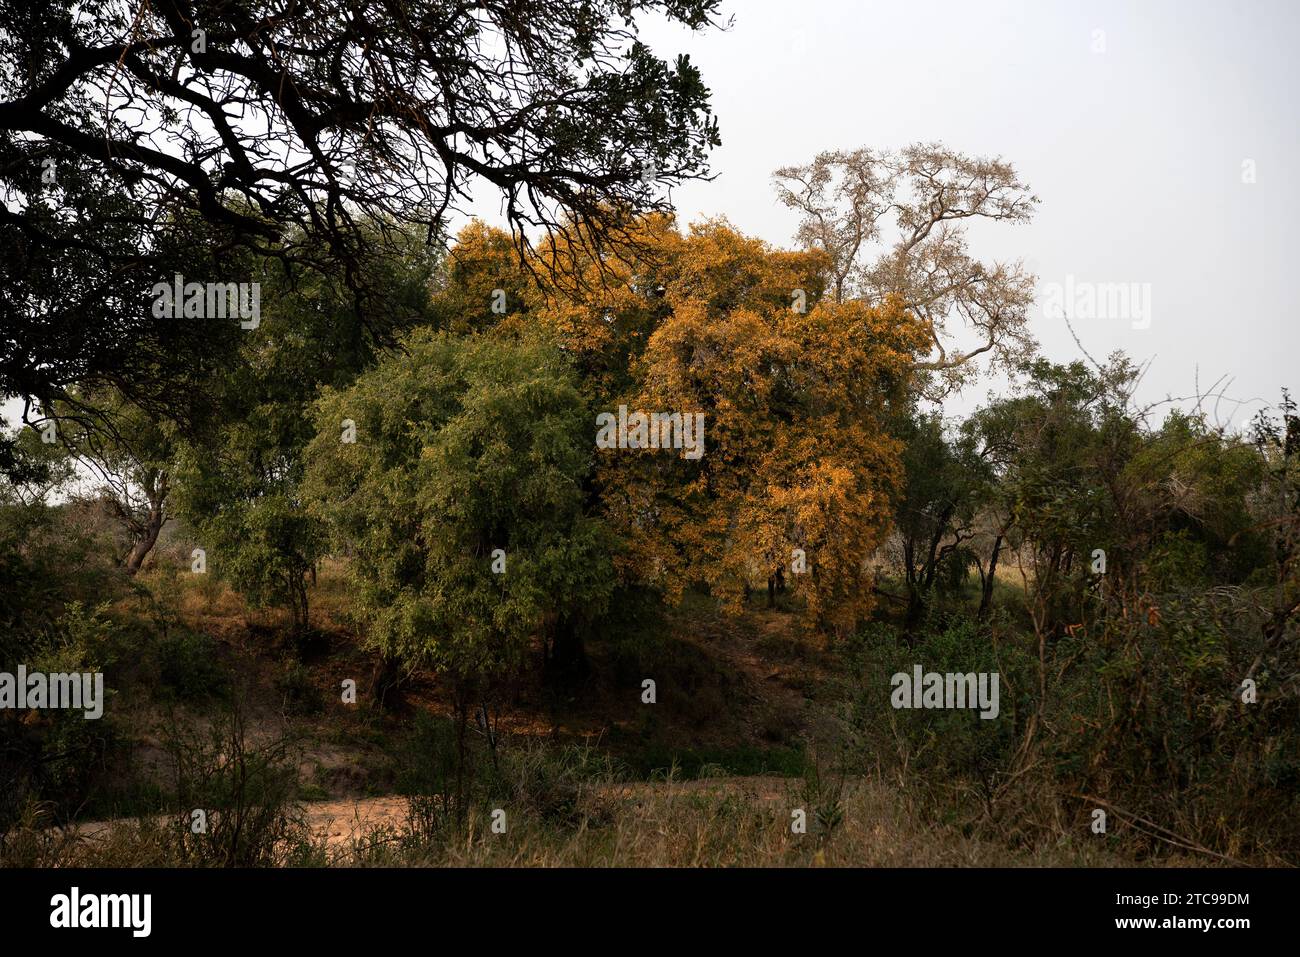 The yellow leaves of the Jackalberry tree in autumn Stock Photo